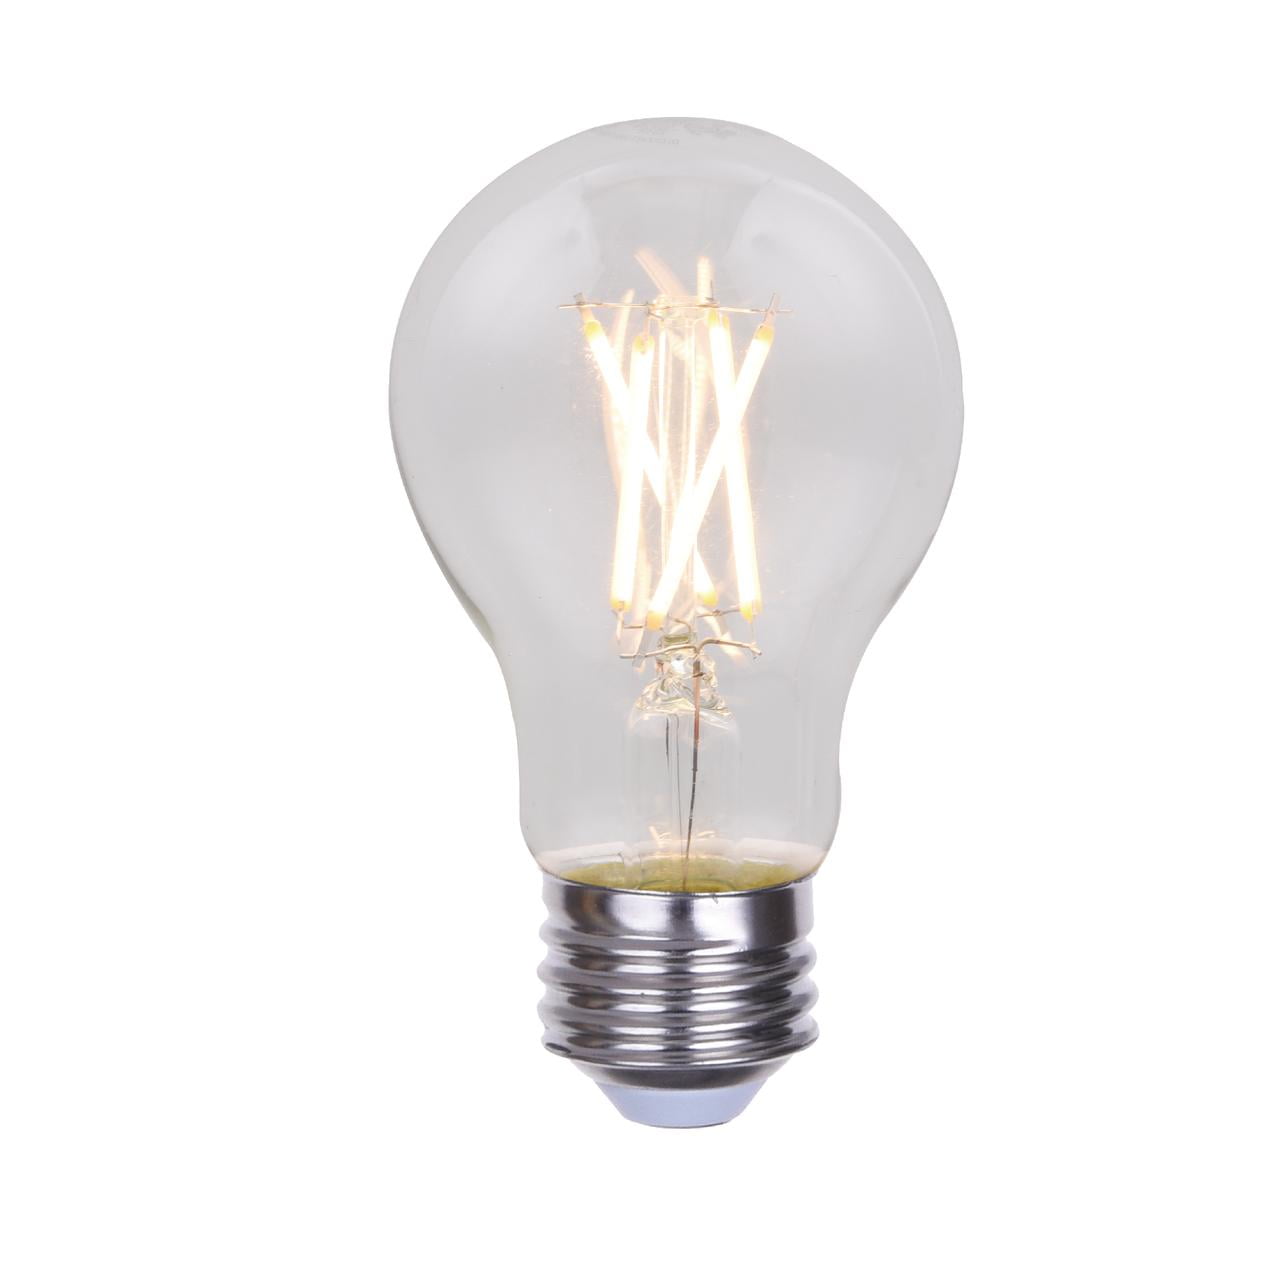 Better Homes  Gardens Better Homes & Gardens LED Vintage Style Light Bulb,A19 40 Watts Soft White Classic Filament,Medium Base,Dimmable,2 Pack